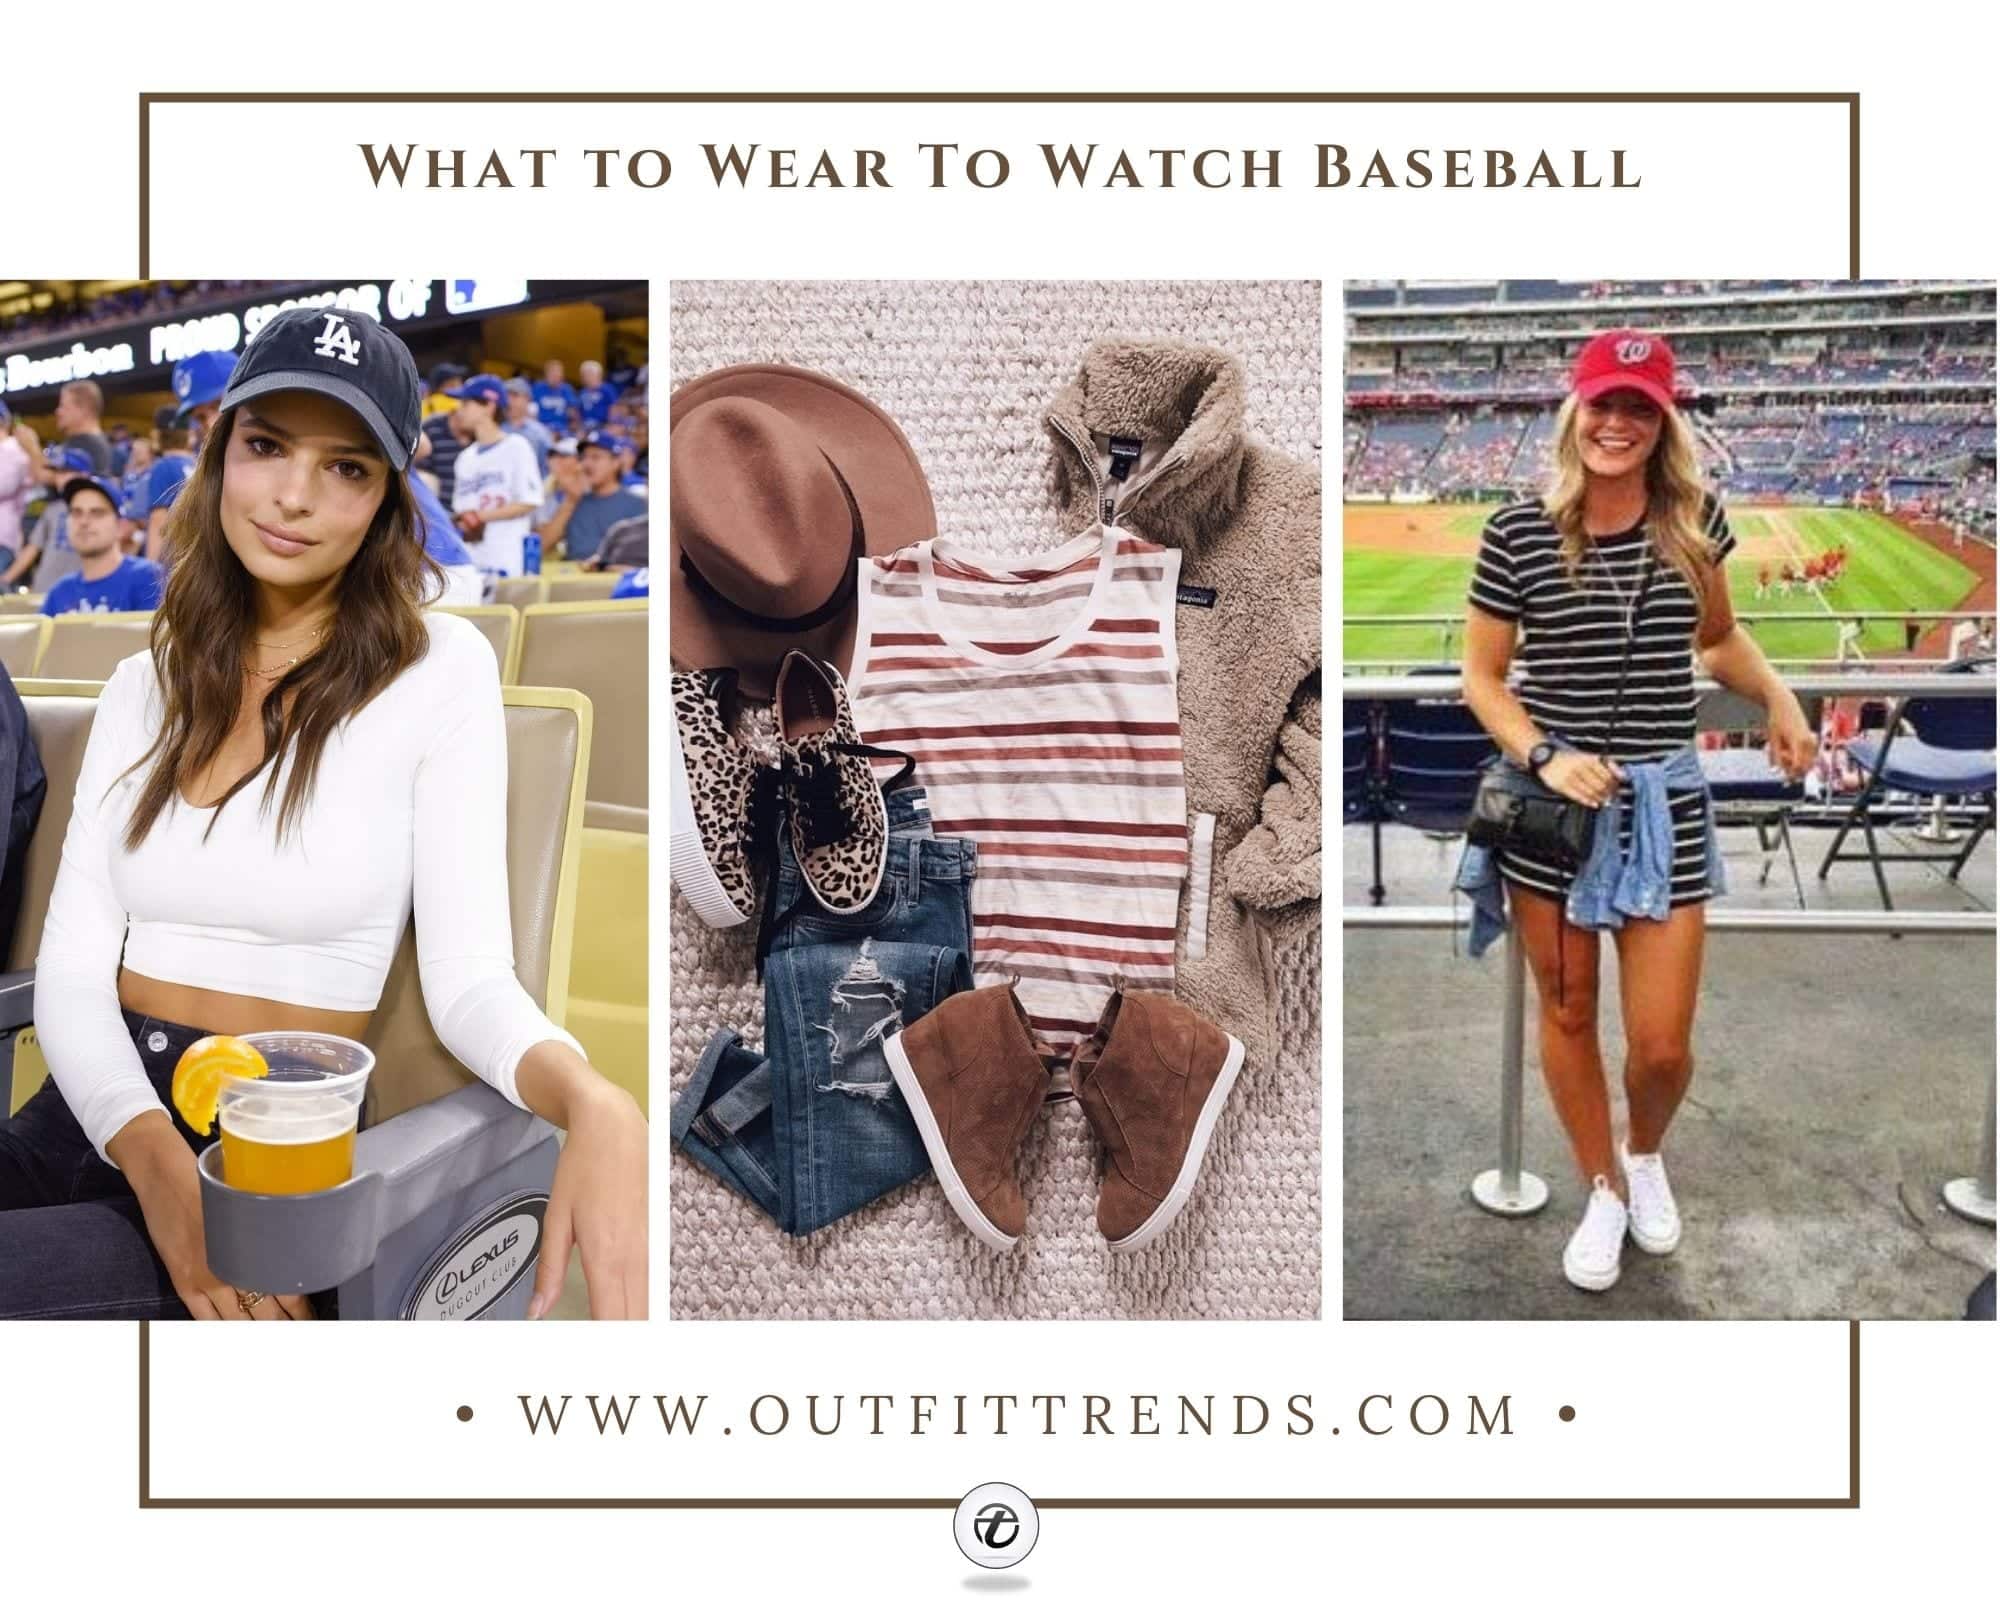 10 Best Yankees Game Outfit ideas